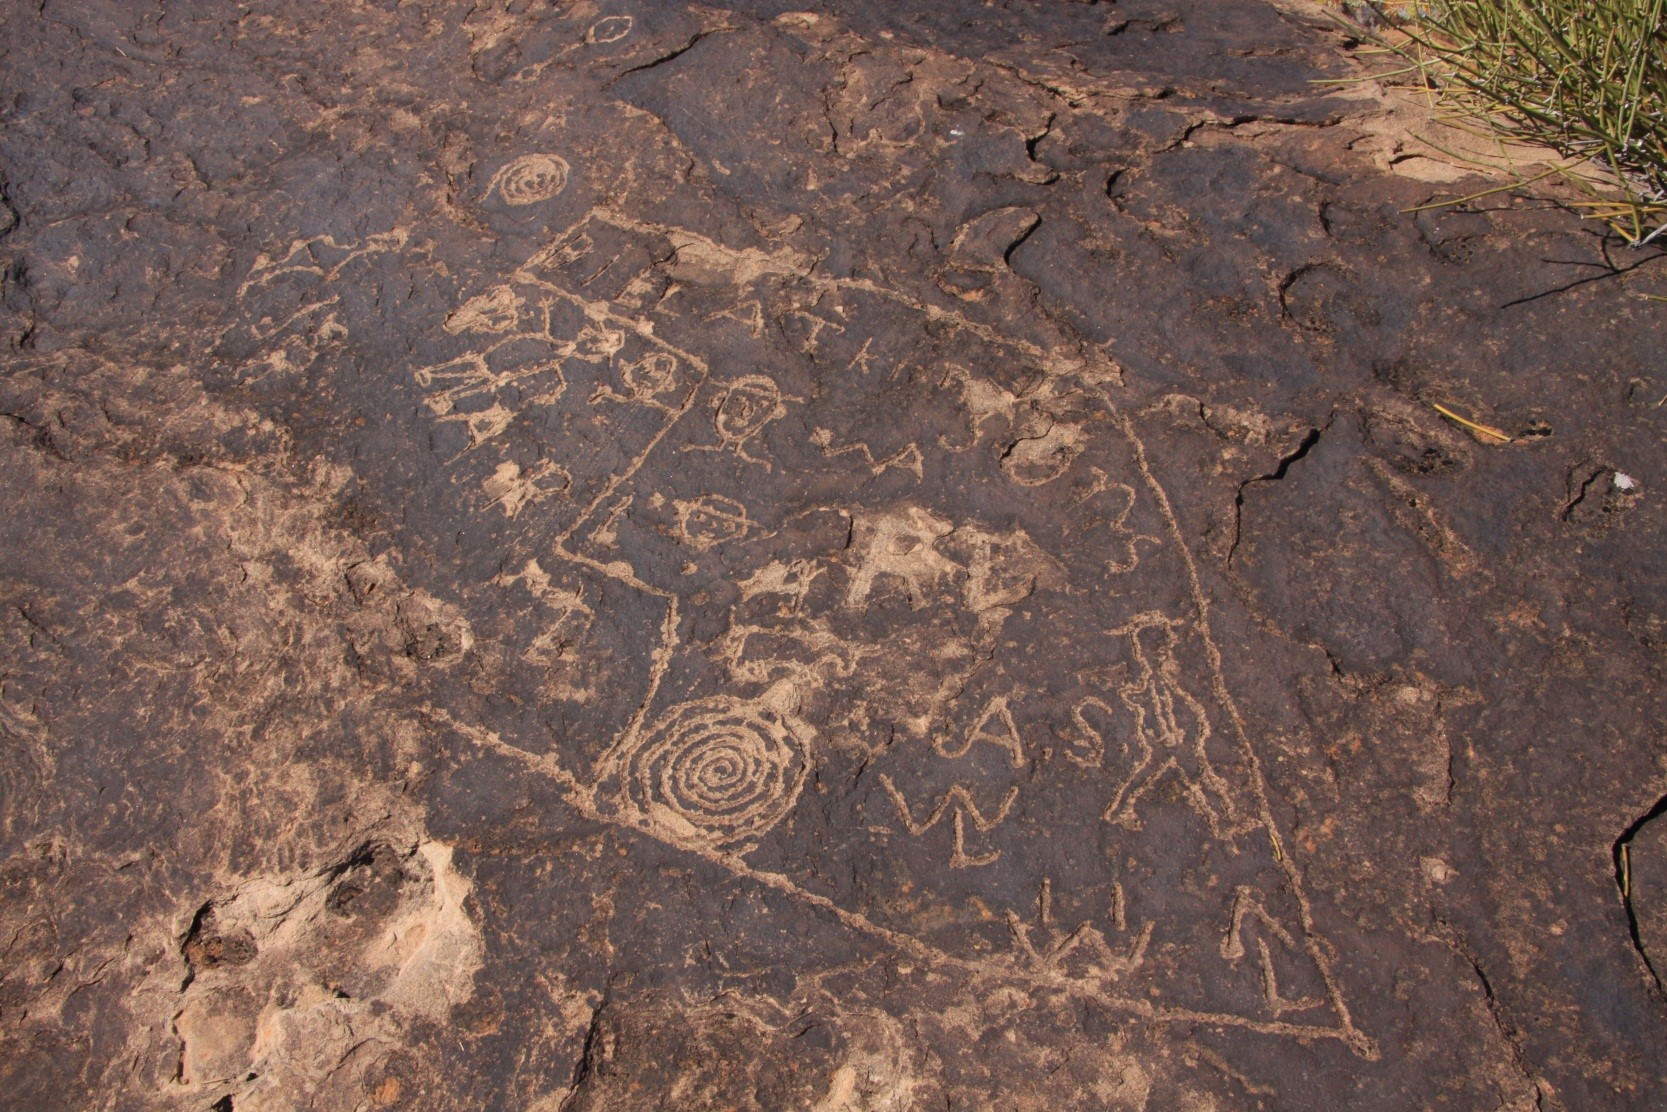 Petroglyph inscribed by the sons of William Atkin near Atkinville